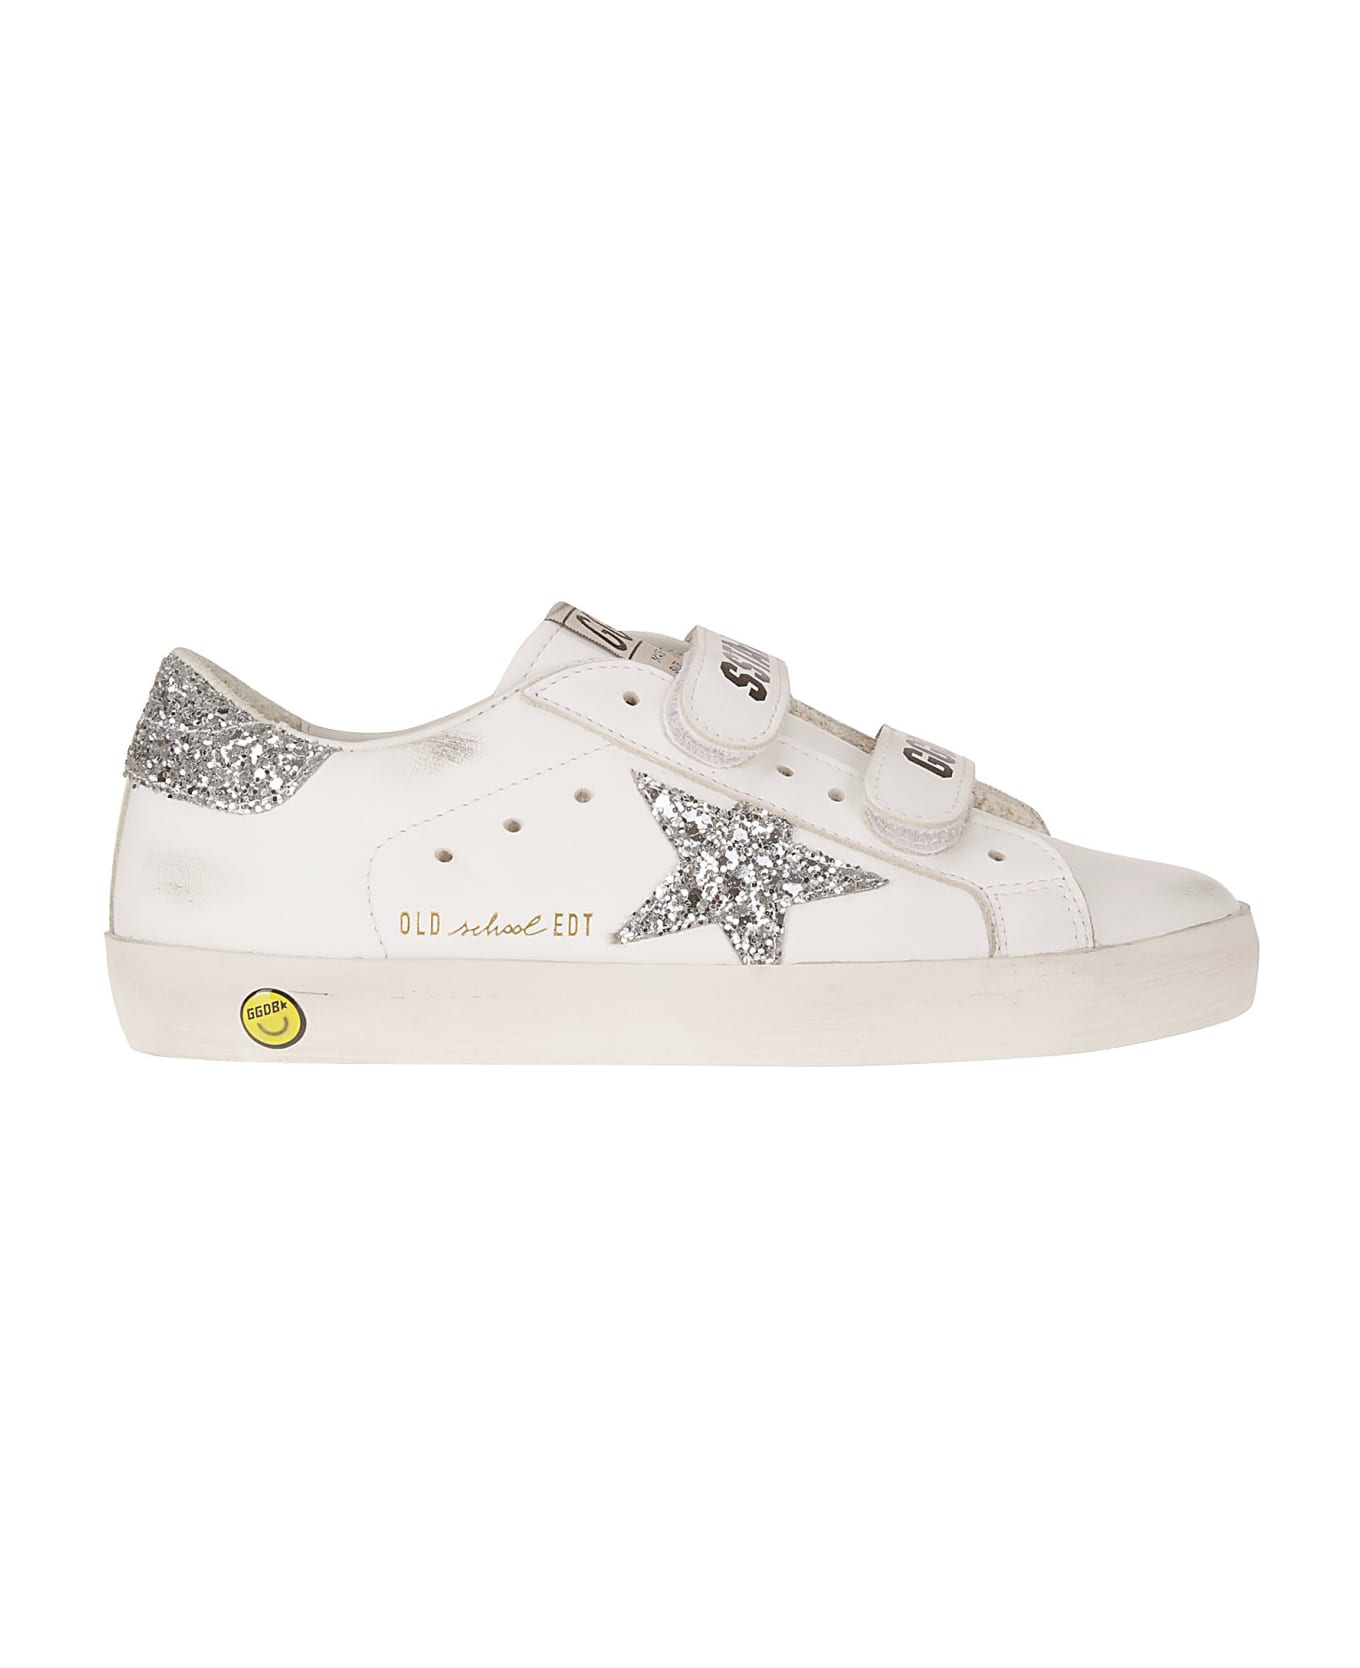 Golden Goose Old School Leather Upper Suede Toe Glitter Star - WHITE/ICE/SILVER